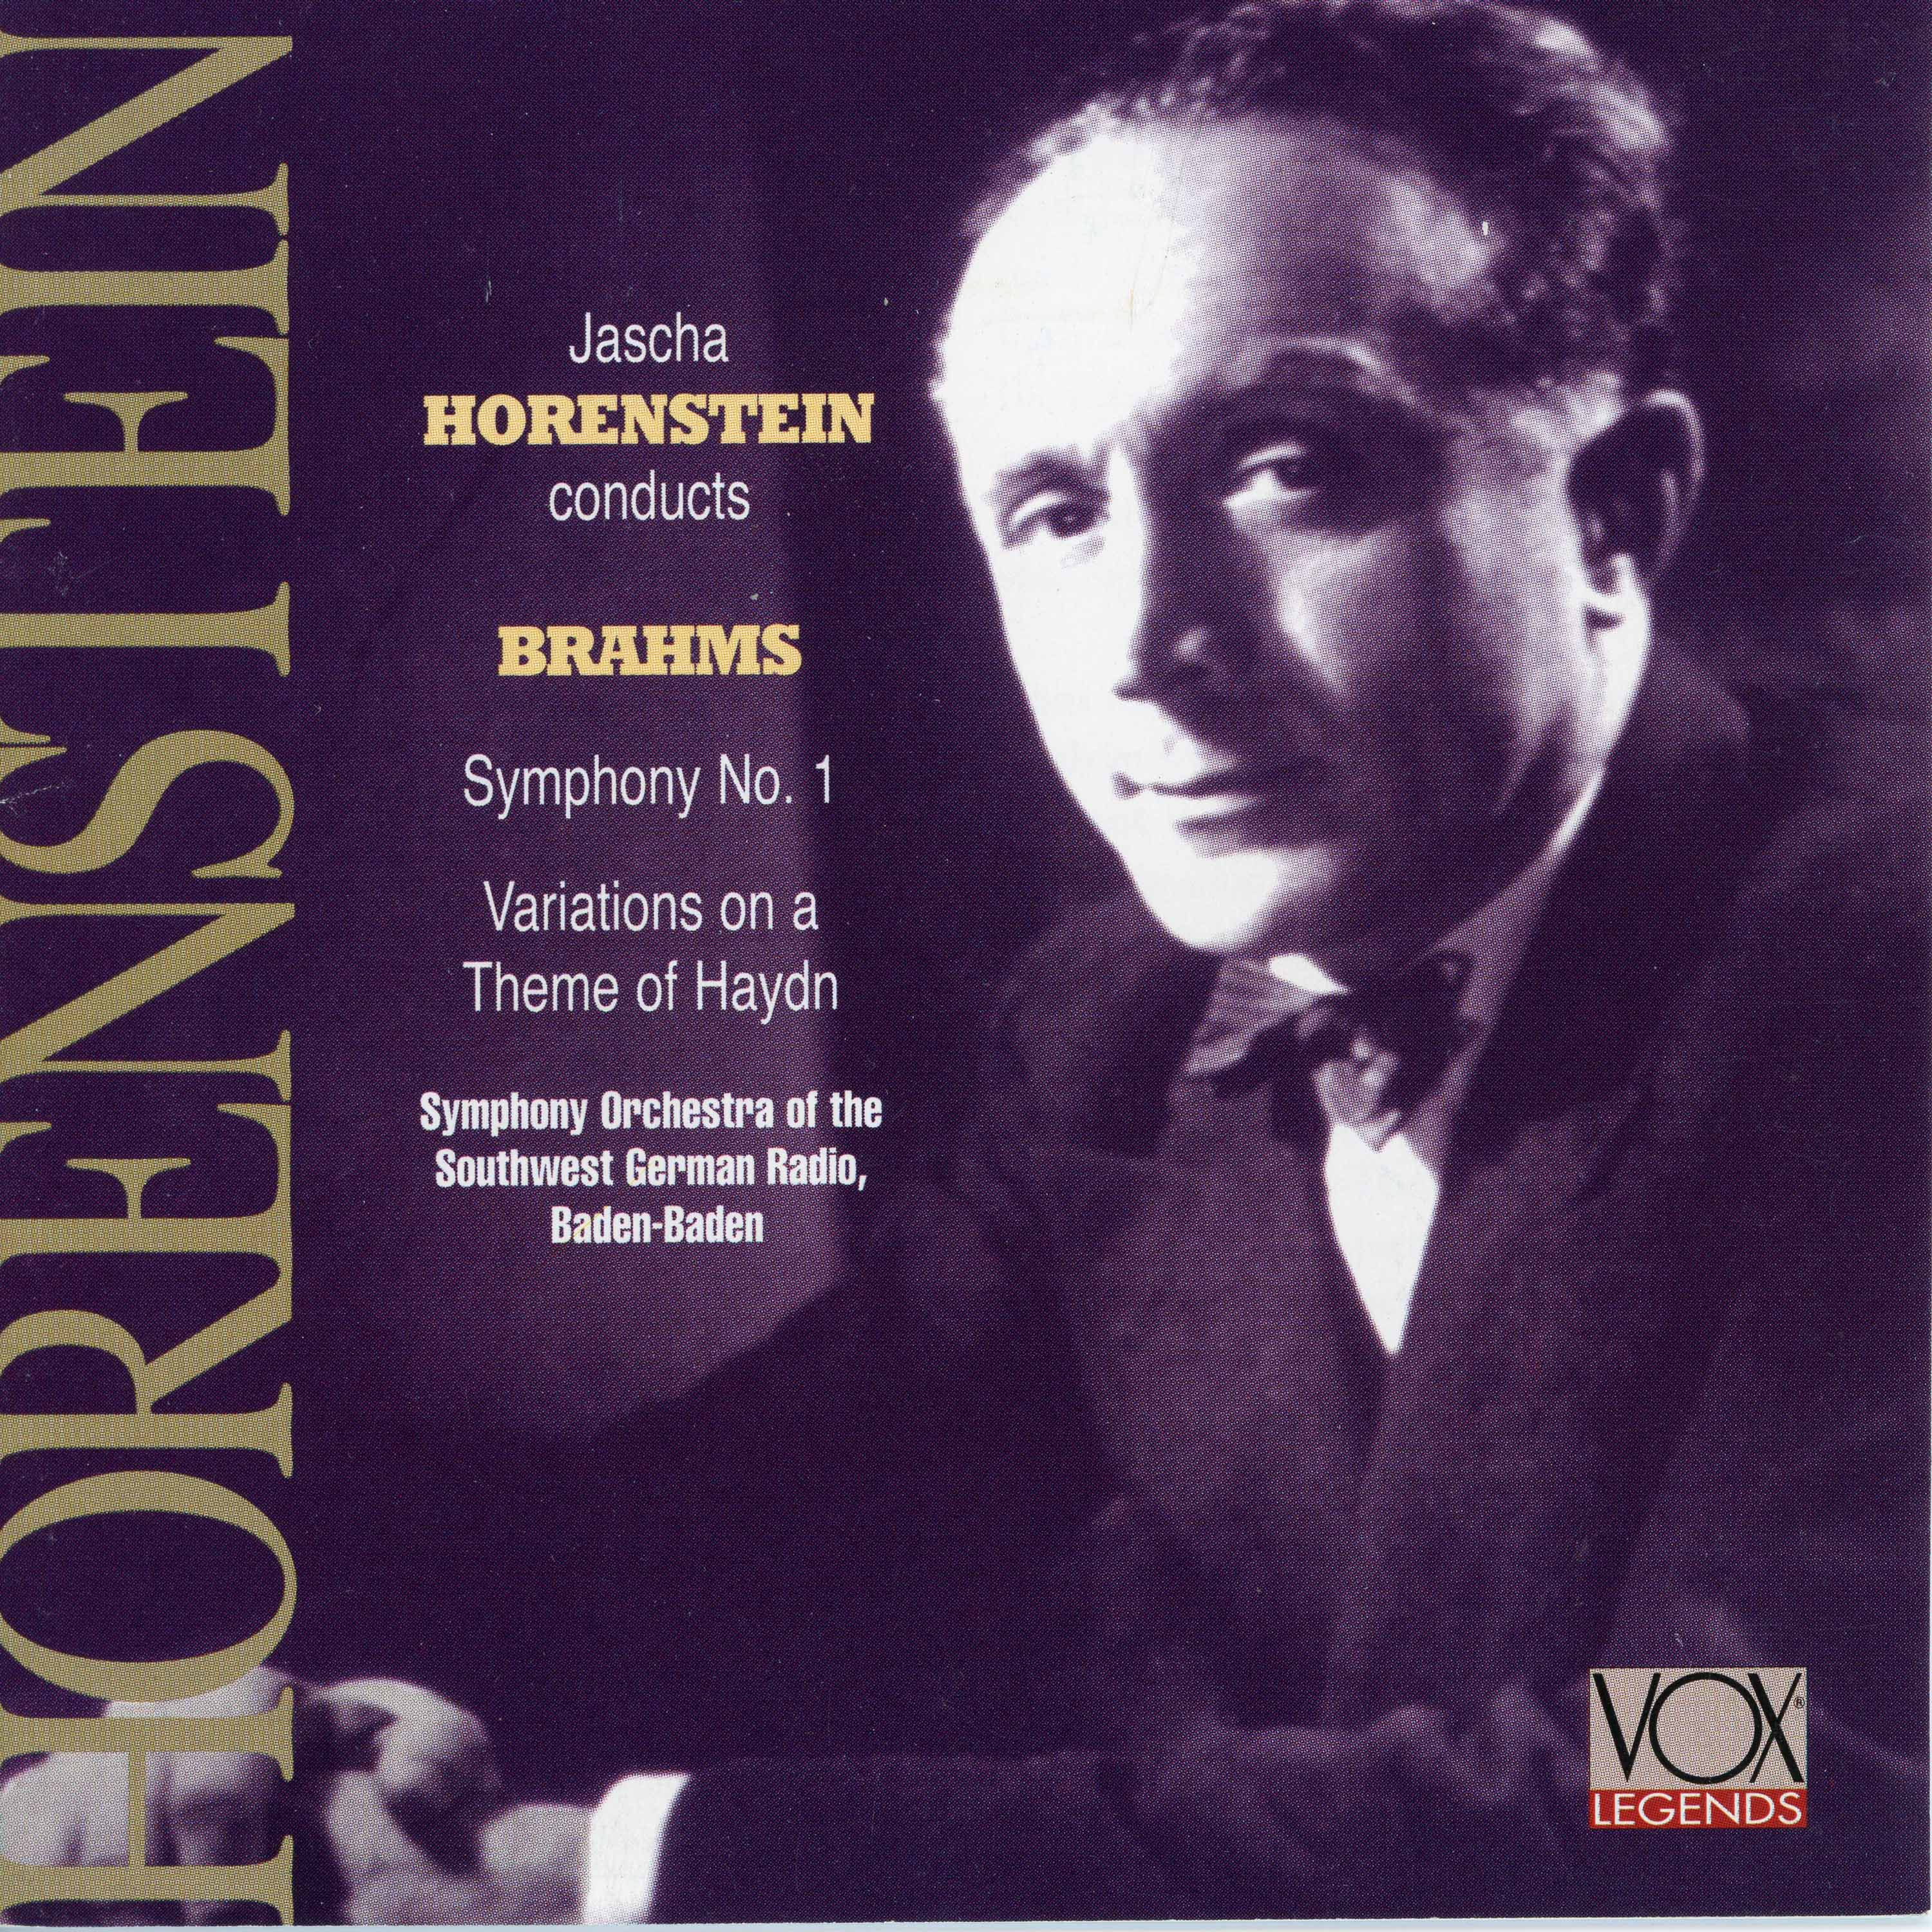 Variations on a Theme by Haydn, Op. 56a " St. Anthony Variations": Variations on a Theme by Haydn, Op. 56a " St. Anthony Variations": Var. 1, Poco piu animato